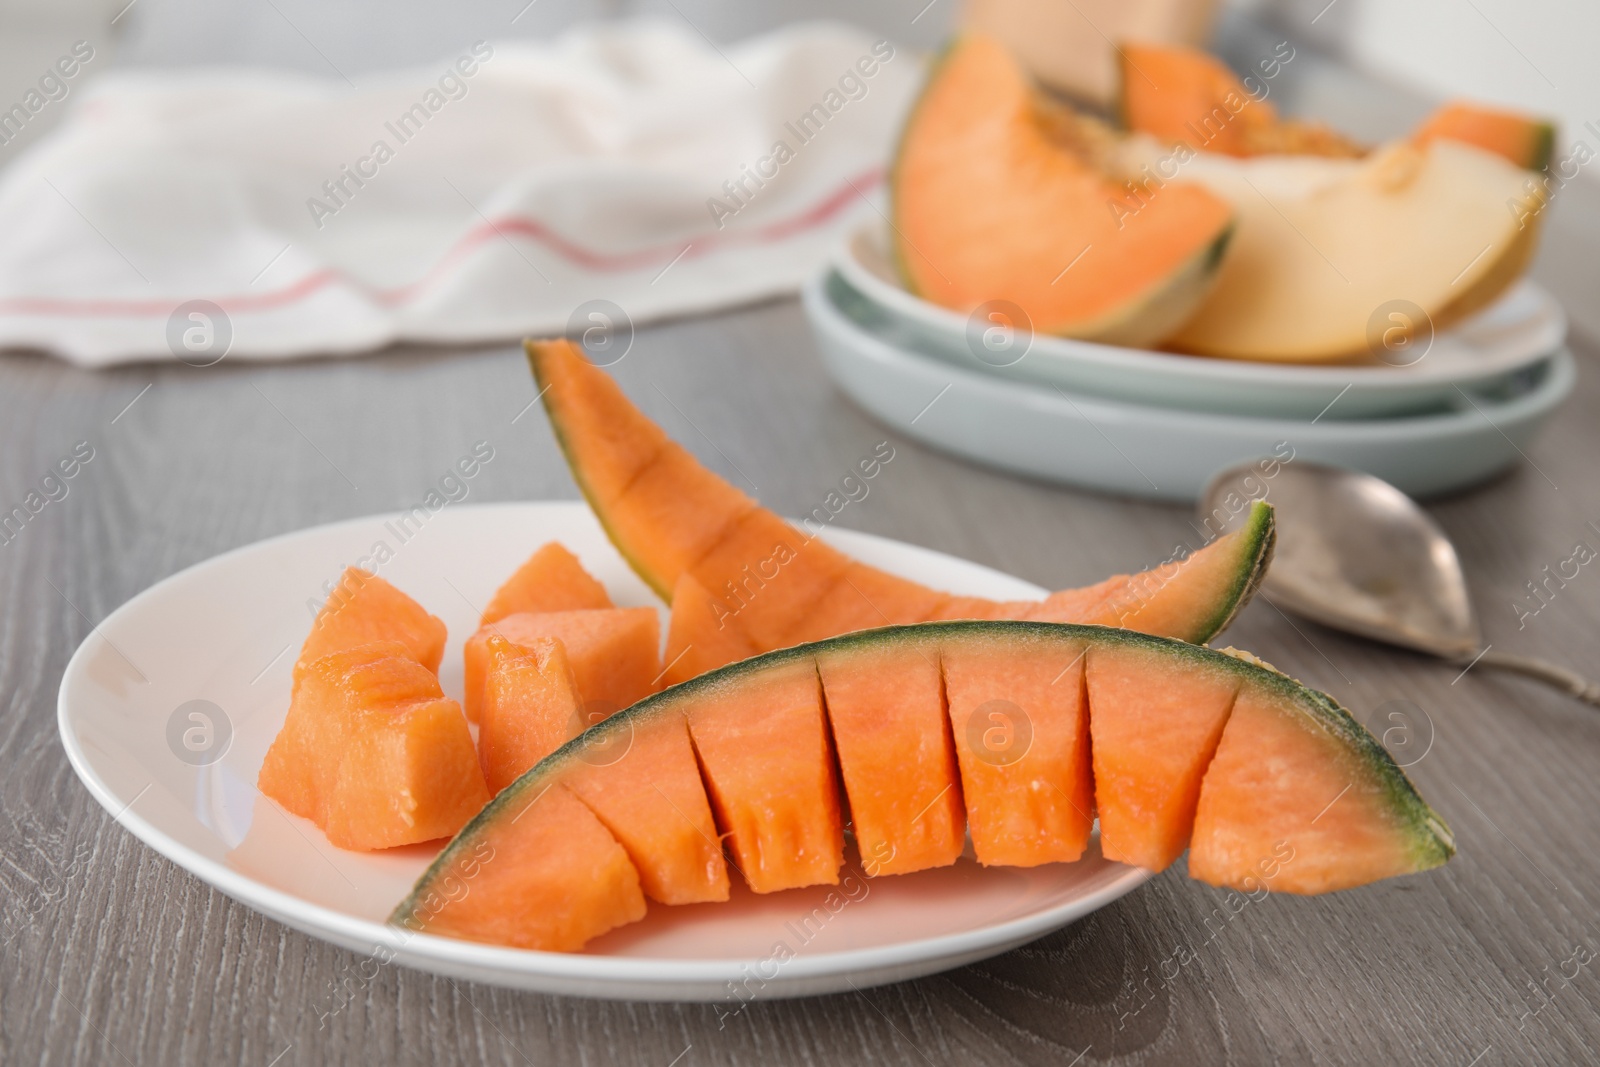 Photo of Slices of ripe cantaloupe melon on wooden table